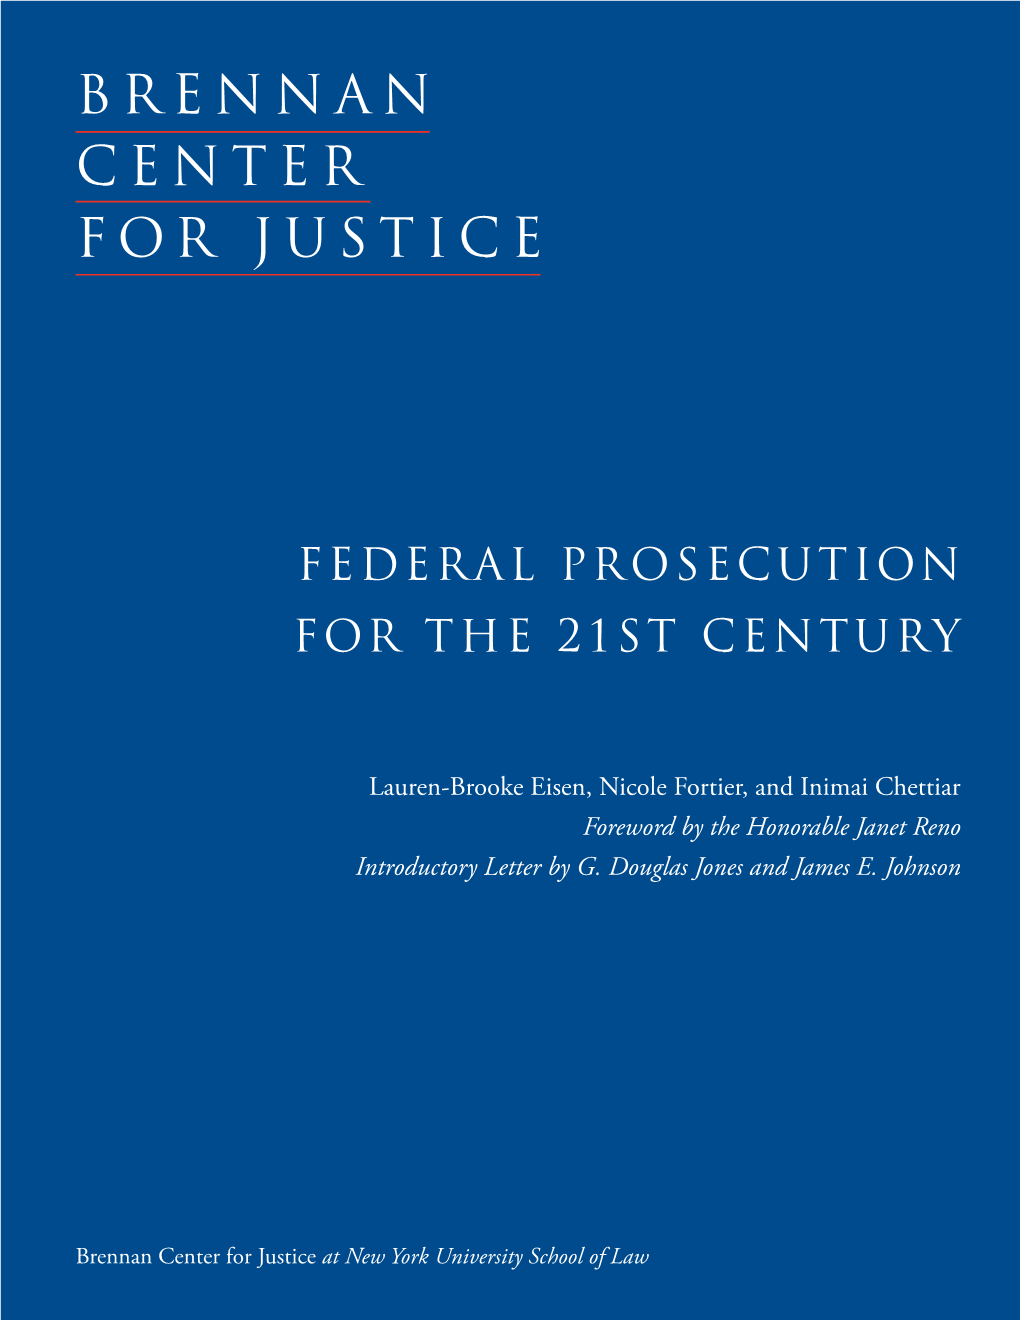 FEDERAL PROSECUTION for the 21St CENTURY